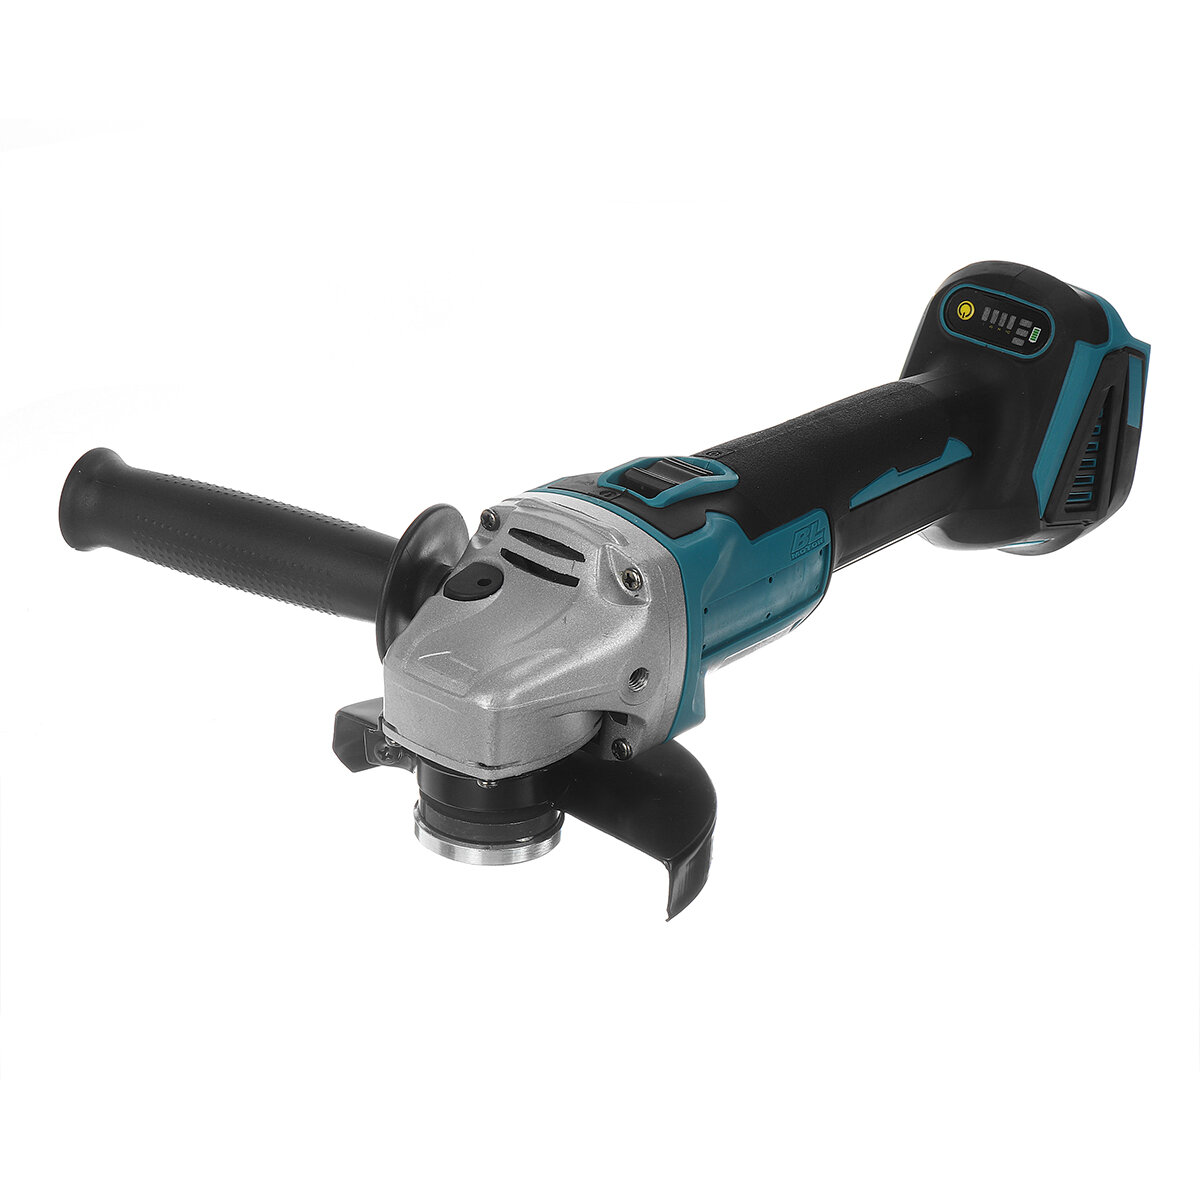 125mm Brushless Angle Grinder Rechargeable Adjustable Speed Angle Grinder With Battery